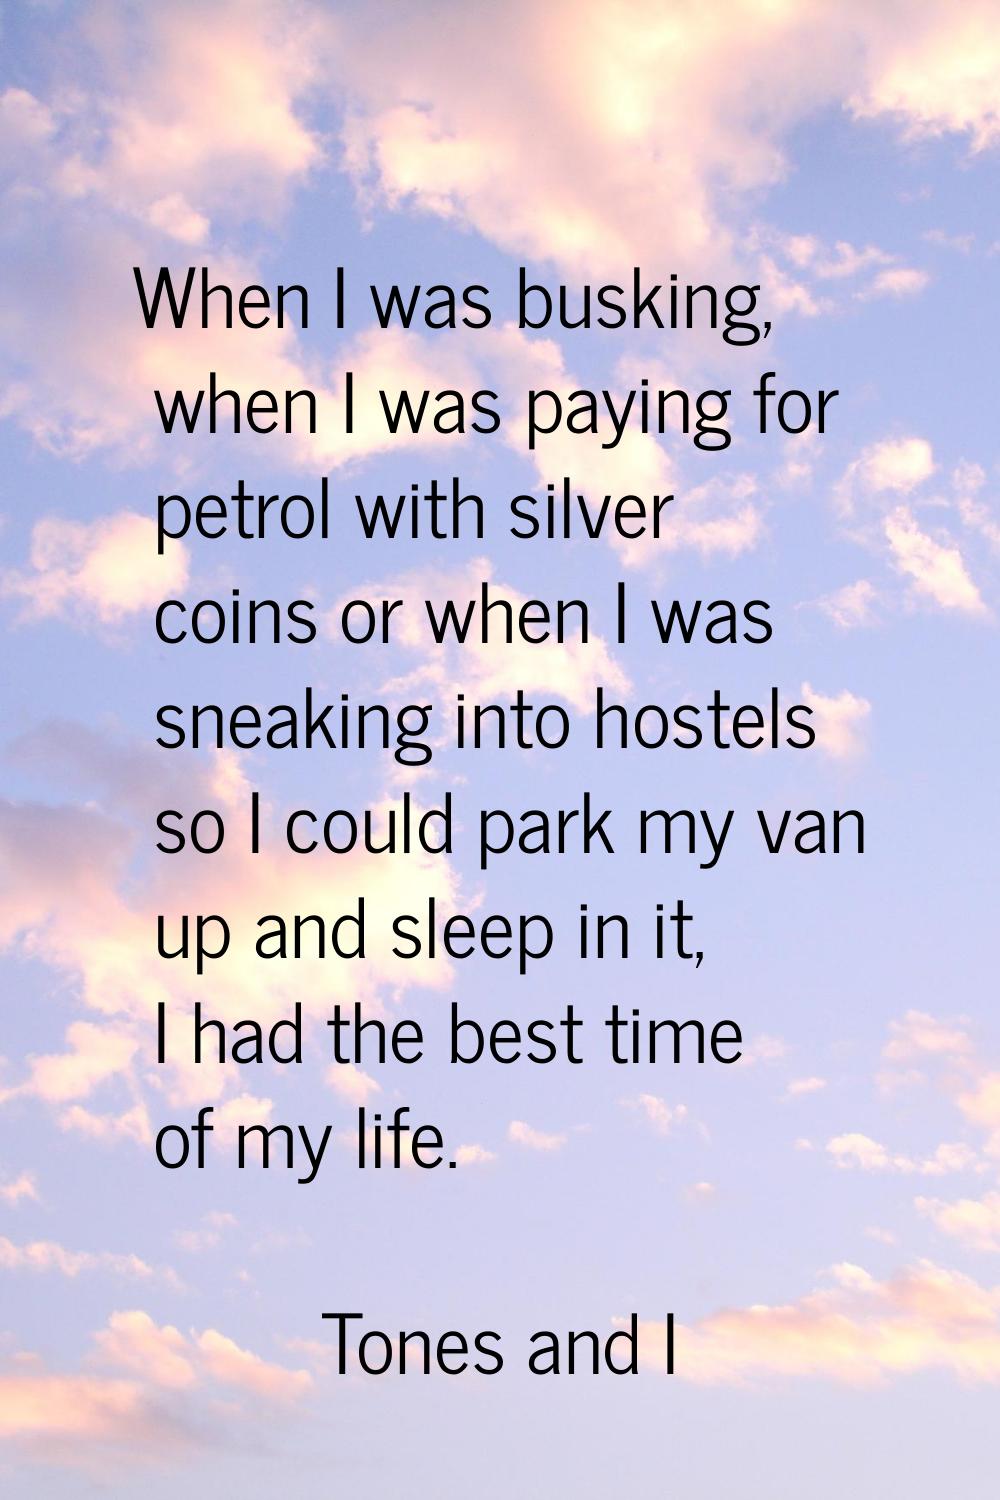 When I was busking, when I was paying for petrol with silver coins or when I was sneaking into host